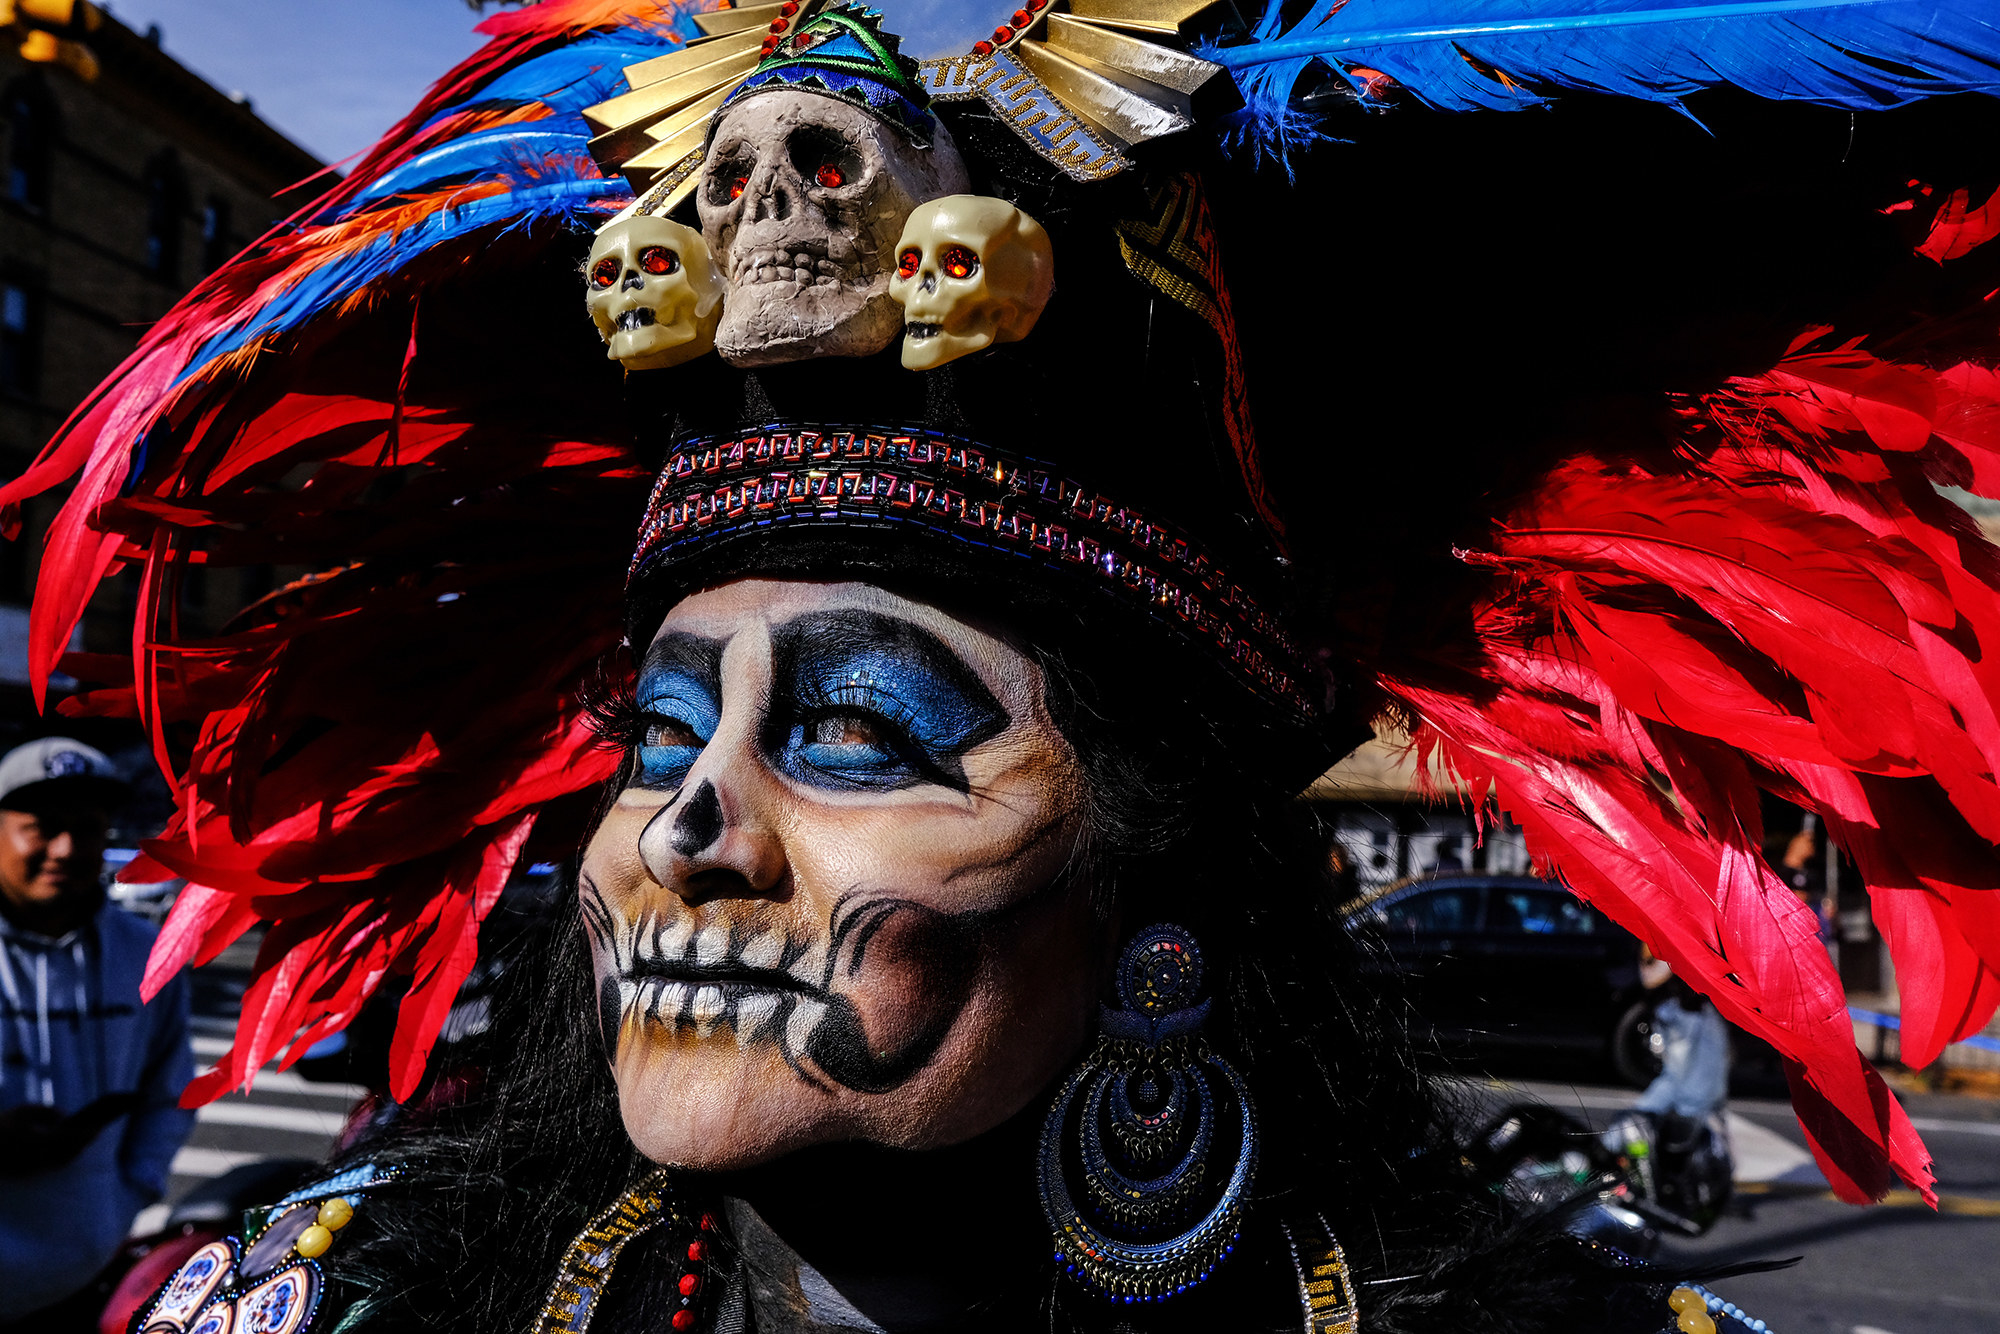 A person with a feathered headdress adorned with skulls and day of the dead skull makeup